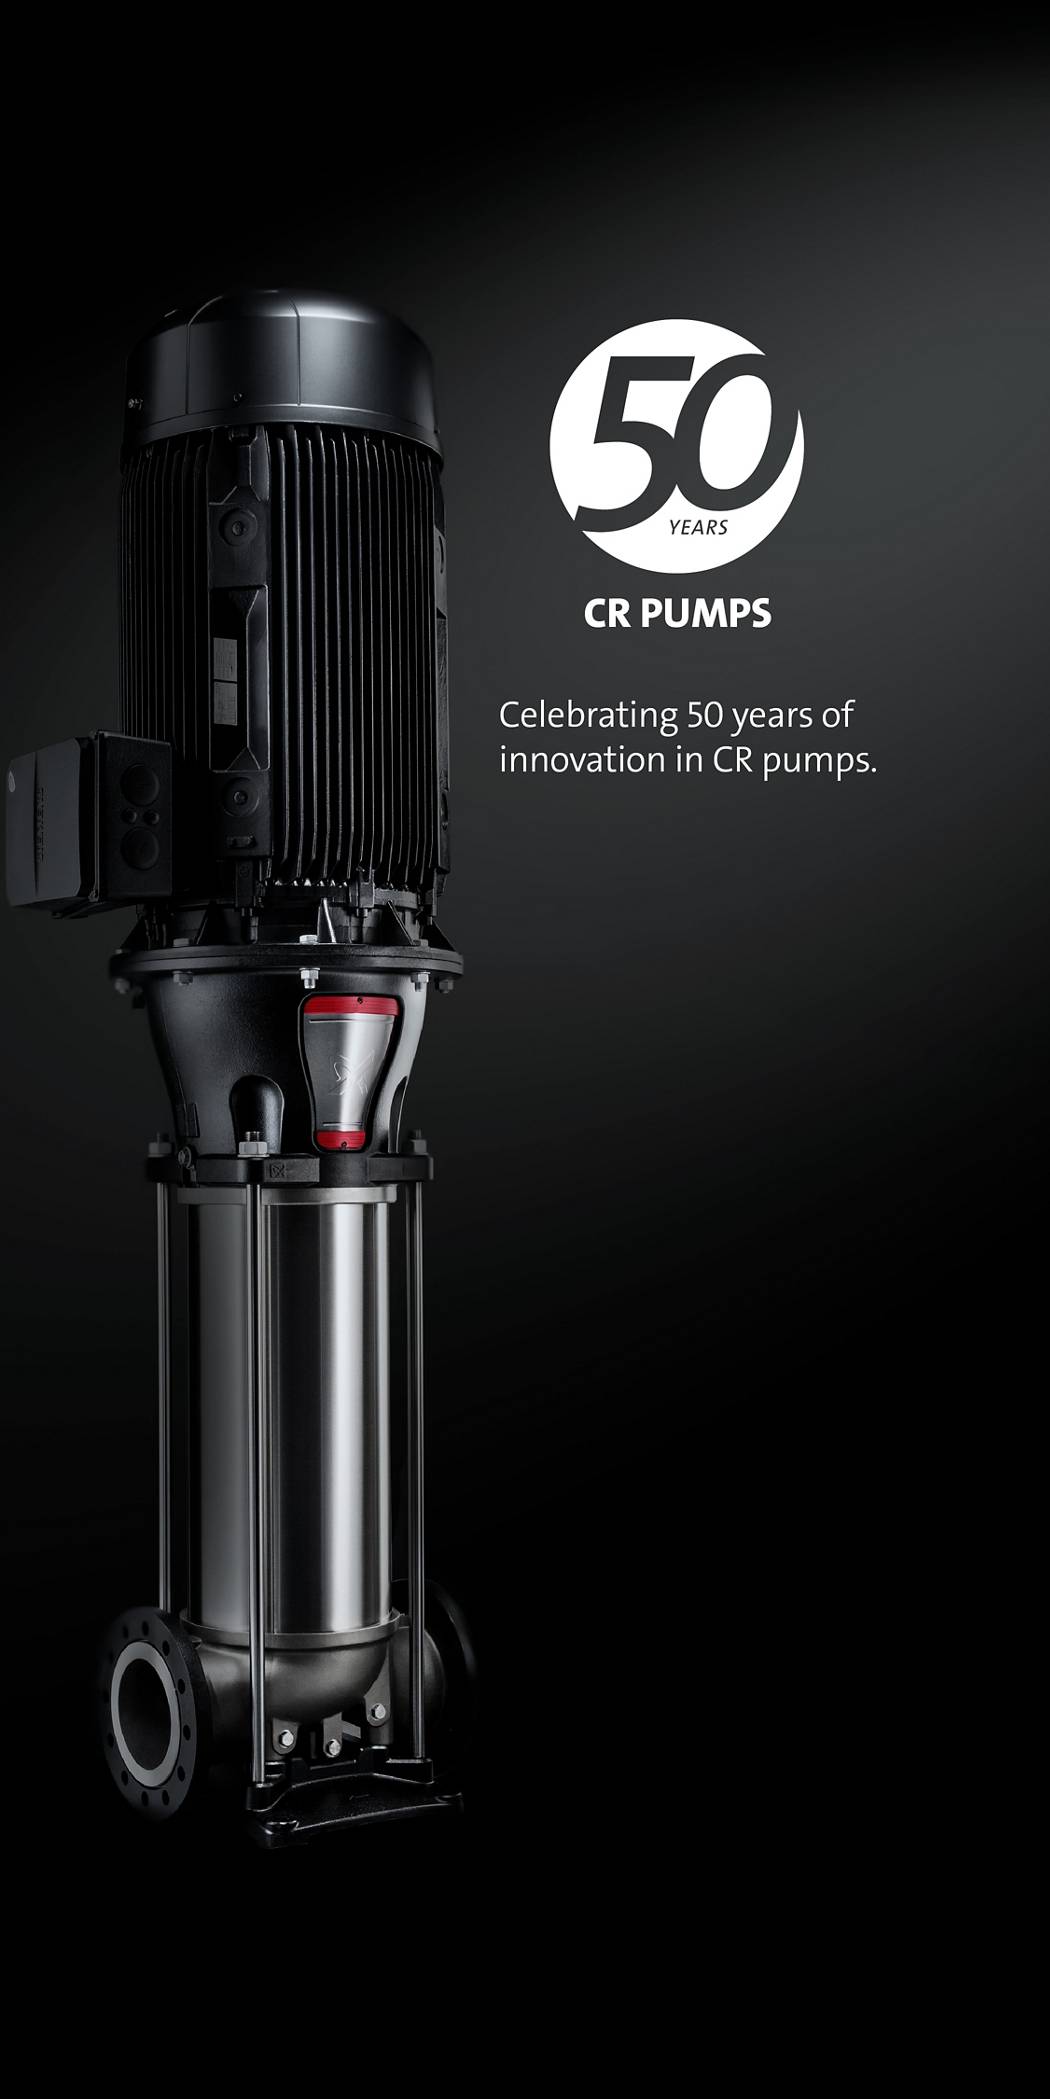 South Africa | The full range supplier of pumps and pump solutions. As a renowned pump manufacturer, Grundfos delivers efficient, reliable, and sustainable solutions all the Step into our